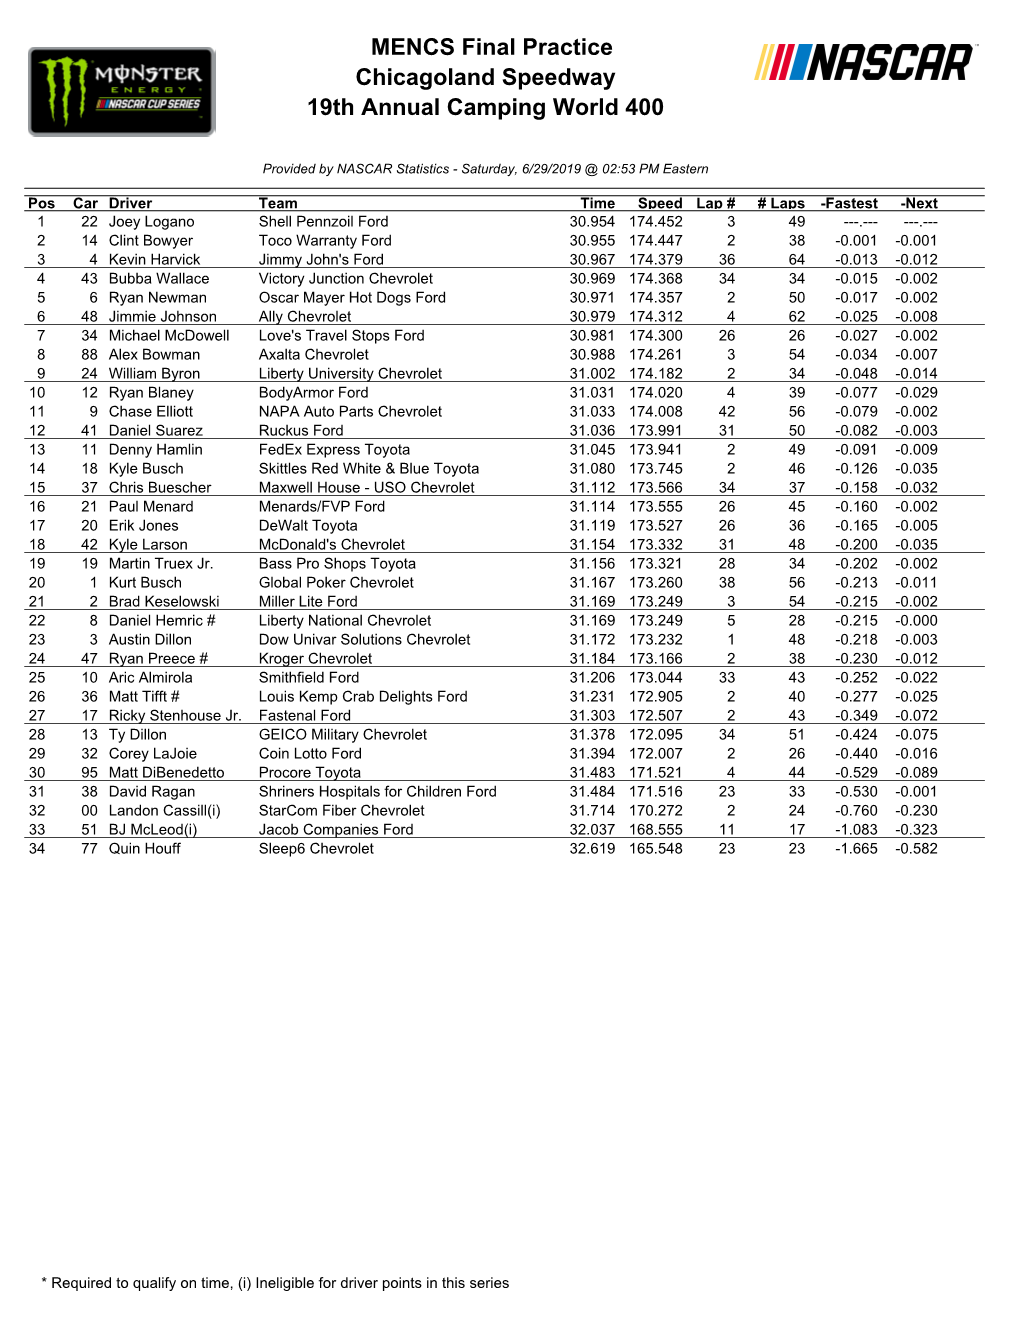 MENCS Final Practice Chicagoland Speedway 19Th Annual Camping World 400